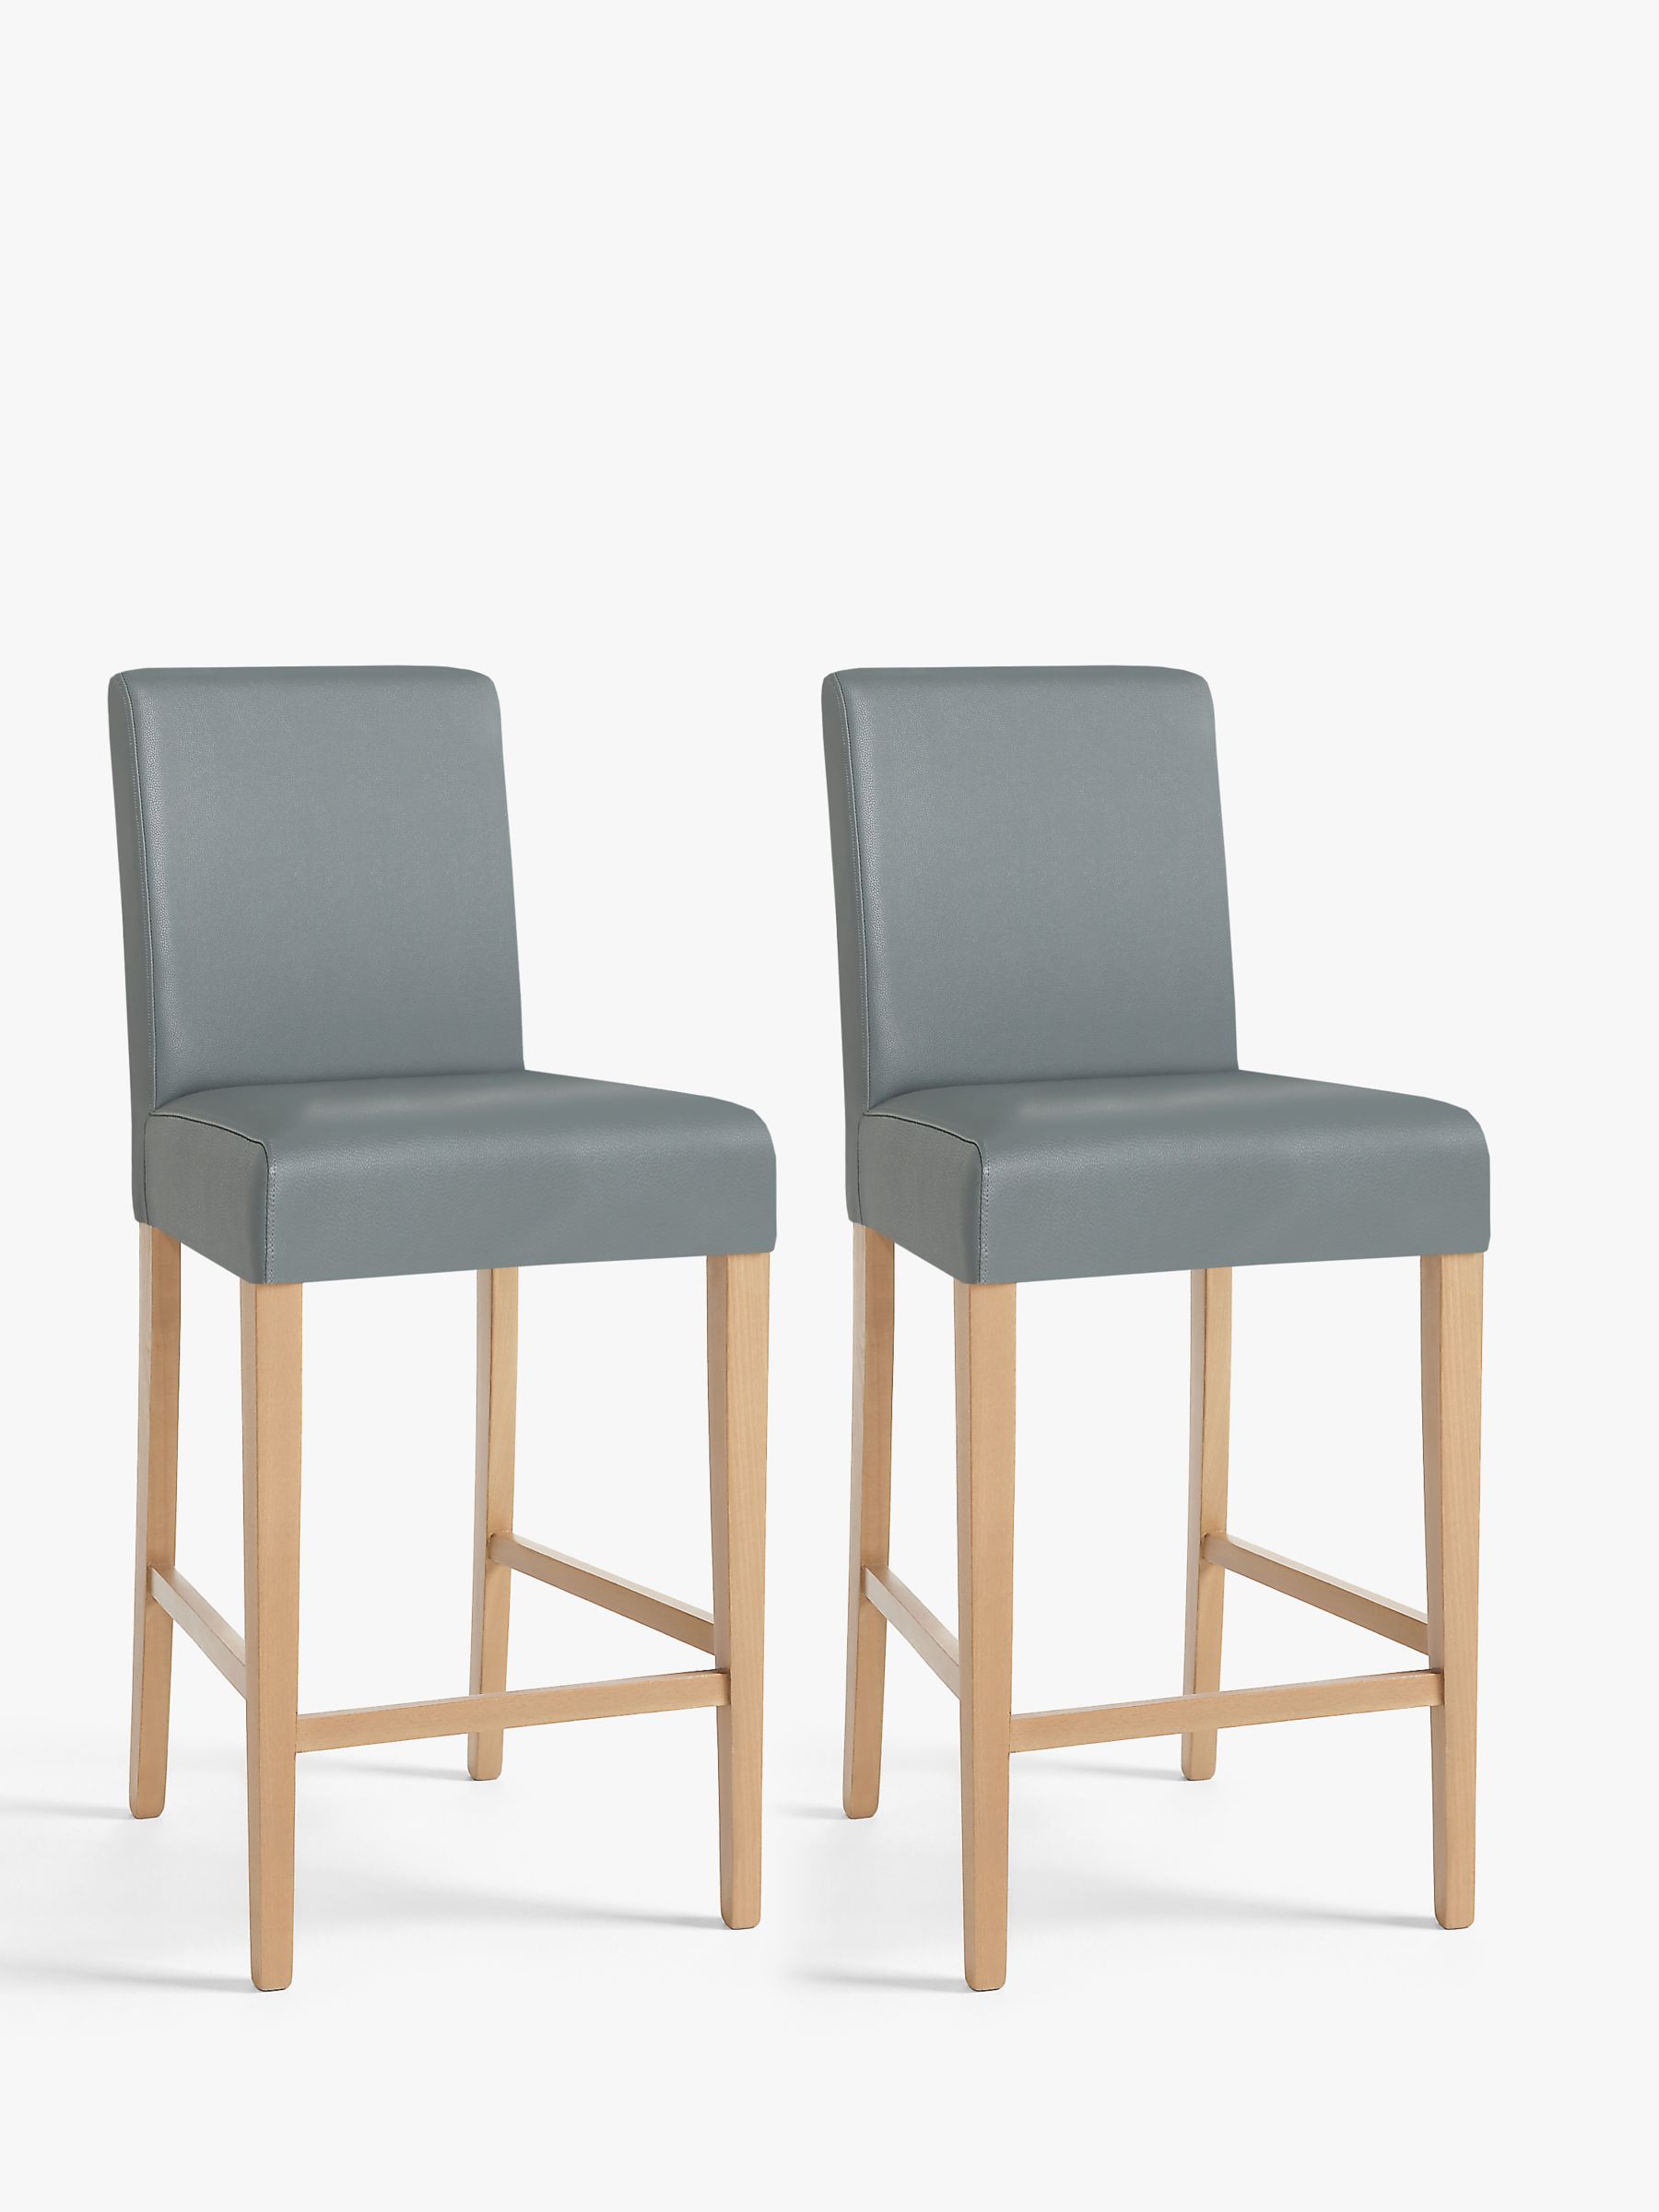 Photo of John lewis anyday slender faux leather bar stool pair